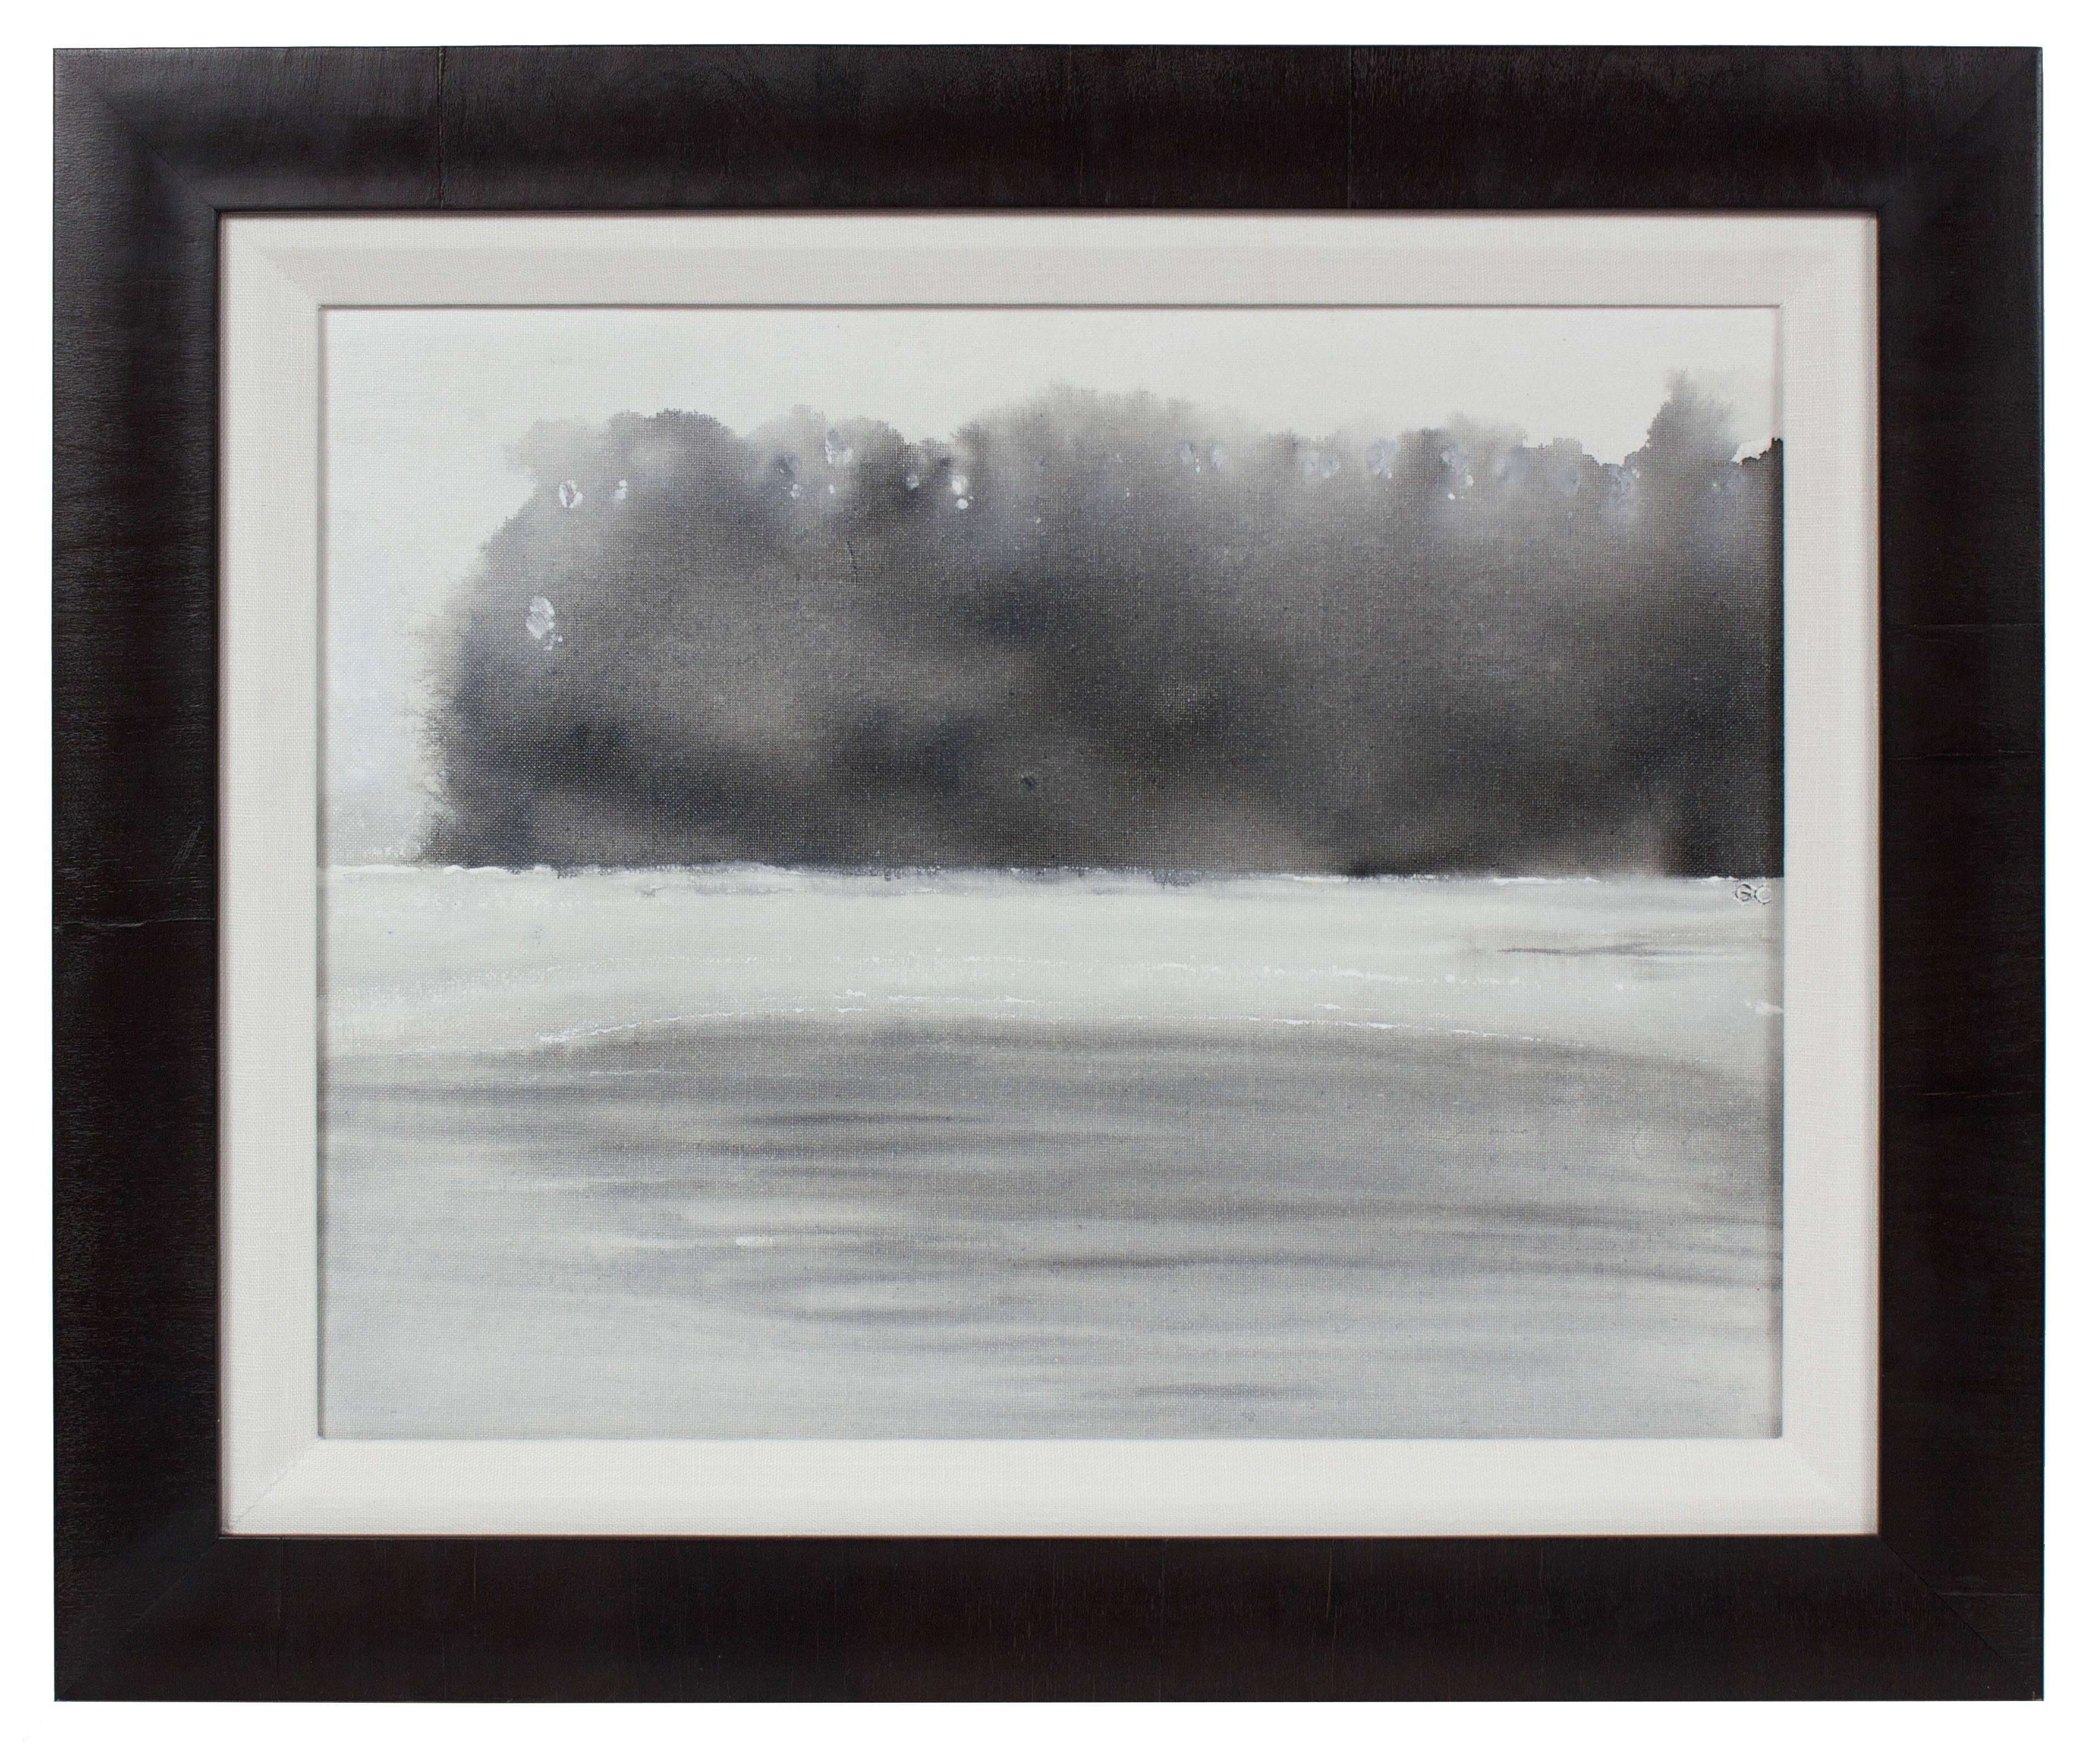 Gaétan Caron Landscape Painting - "Summer Fog" Abstracted Monochromatic New Hampshire Landscape in Ink, 2017